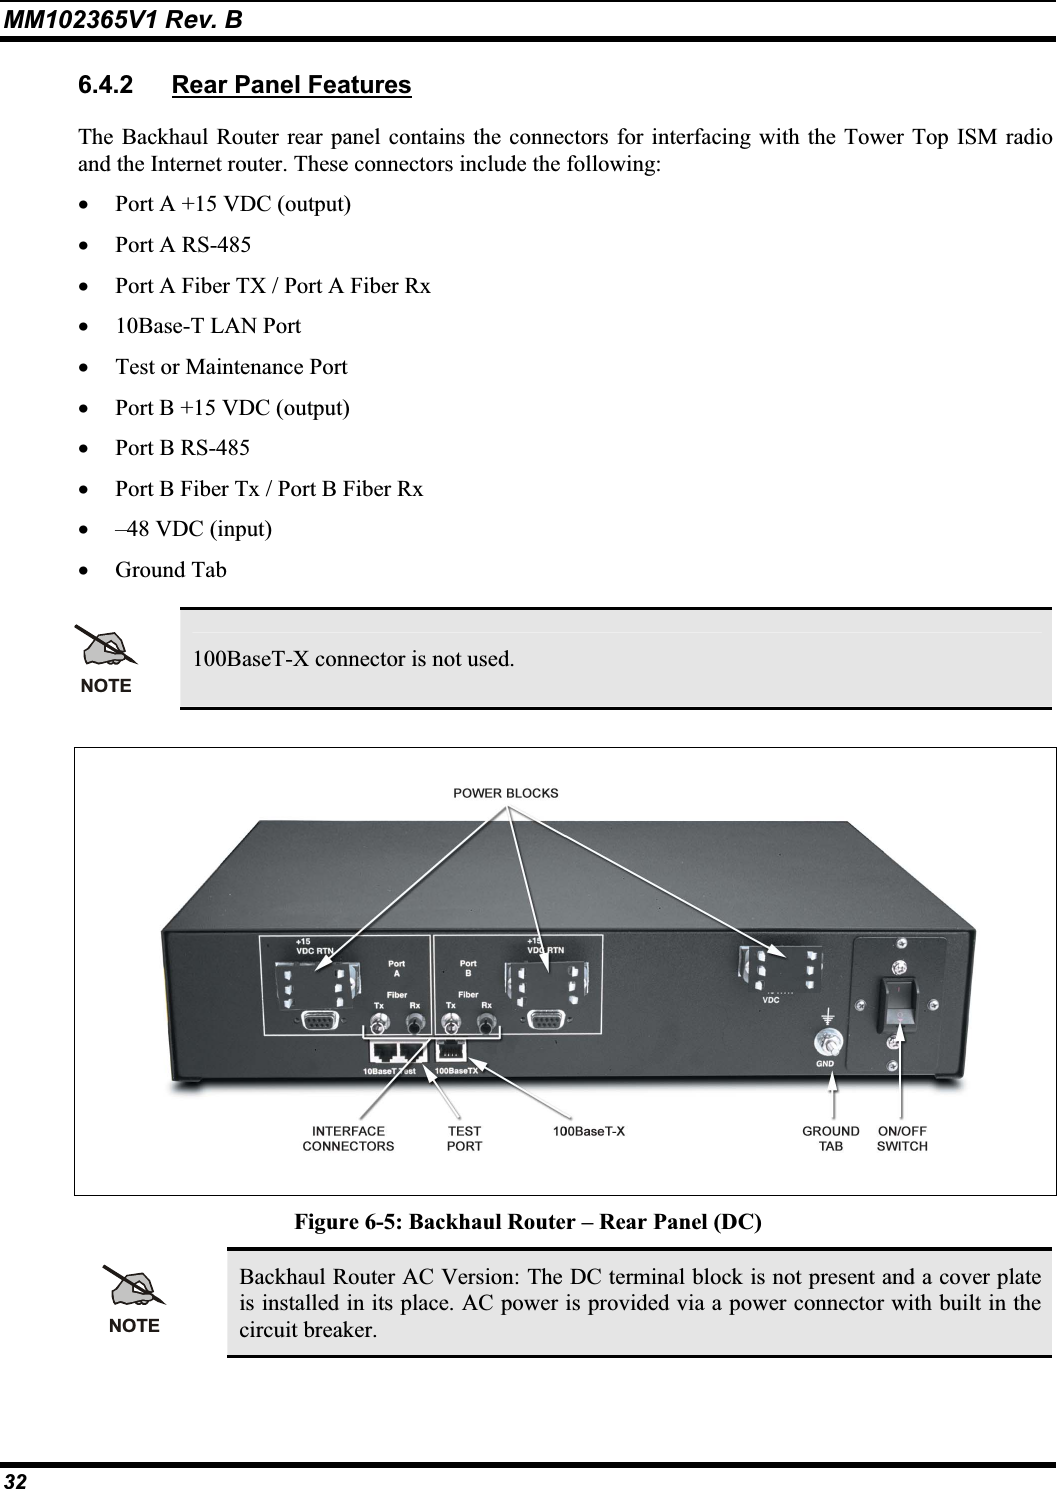 MM102365V1 Rev. B 6.4.2 Rear Panel FeaturesThe Backhaul Router rear panel contains the connectors for interfacing with the Tower Top ISM radio and the Internet router. These connectors include the following: x Port A +15 VDC (output) x Port A RS-485 x Port A Fiber TX / Port A Fiber Rx x 10Base-T LAN Port x Test or Maintenance Port x Port B +15 VDC (output) x Port B RS-485x Port B Fiber Tx / Port B Fiber Rx x –48 VDC (input) x Ground Tab NOTE100BaseT-X connector is not used. Figure 6-5: Backhaul Router – Rear Panel (DC) NOTEBackhaul Router AC Version: The DC terminal block is not present and a cover plate is installed in its place. AC power is provided via a power connector with built in thecircuit breaker. 32